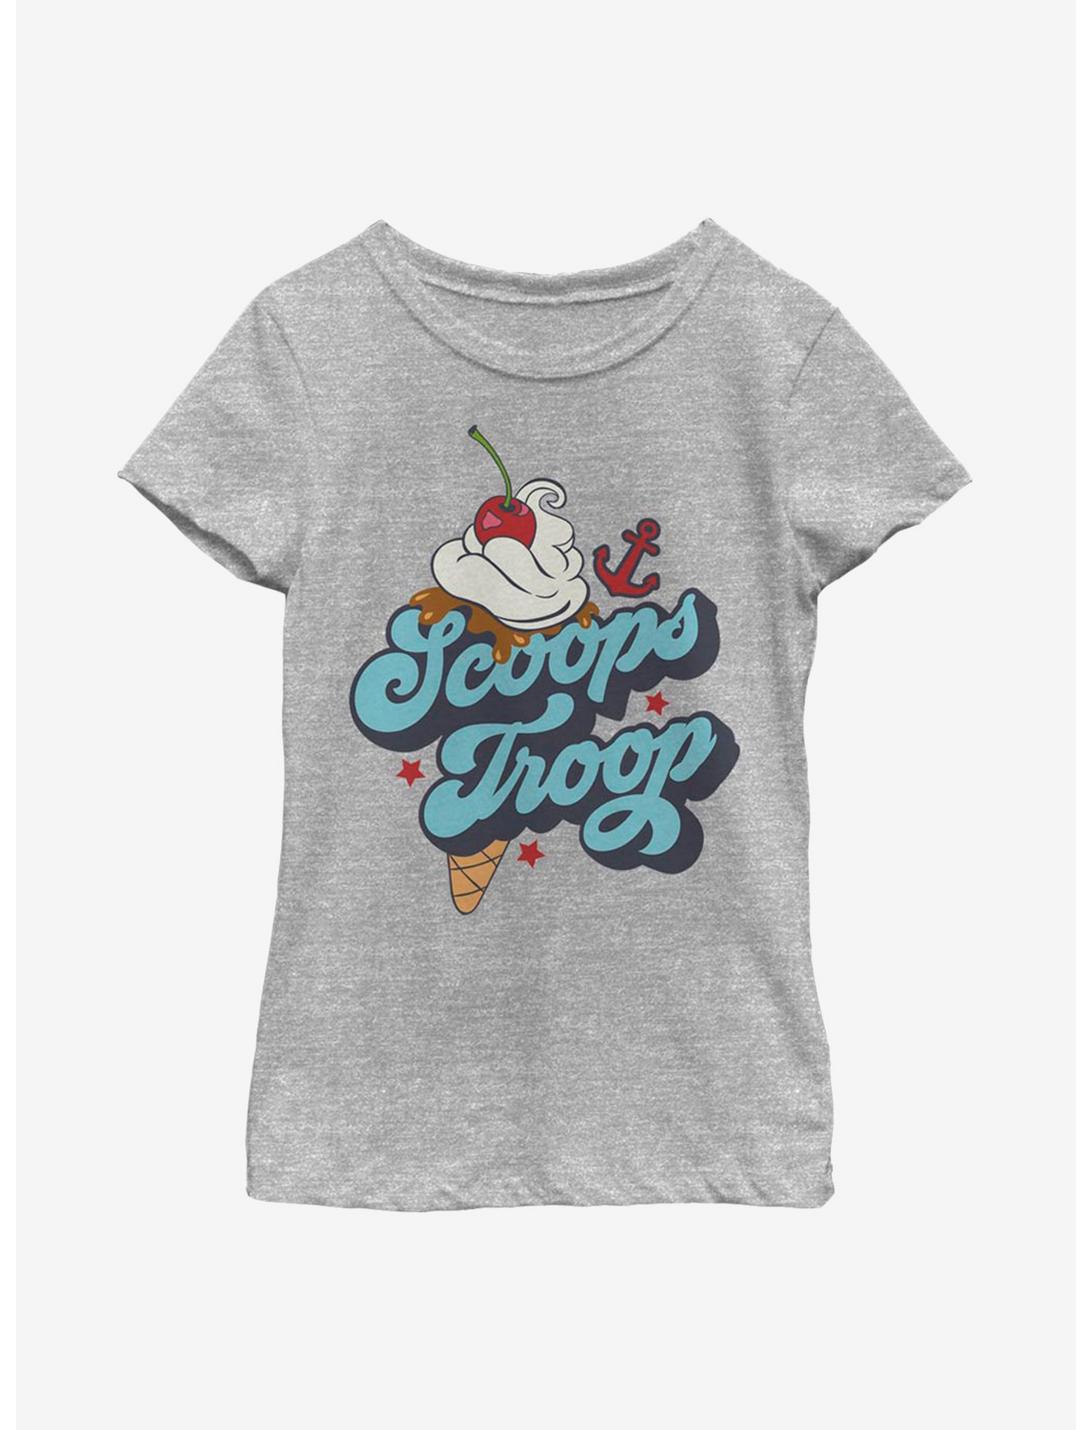 Stranger Things Scoops Troops Youth Girls T-Shirt, ATH HTR, hi-res